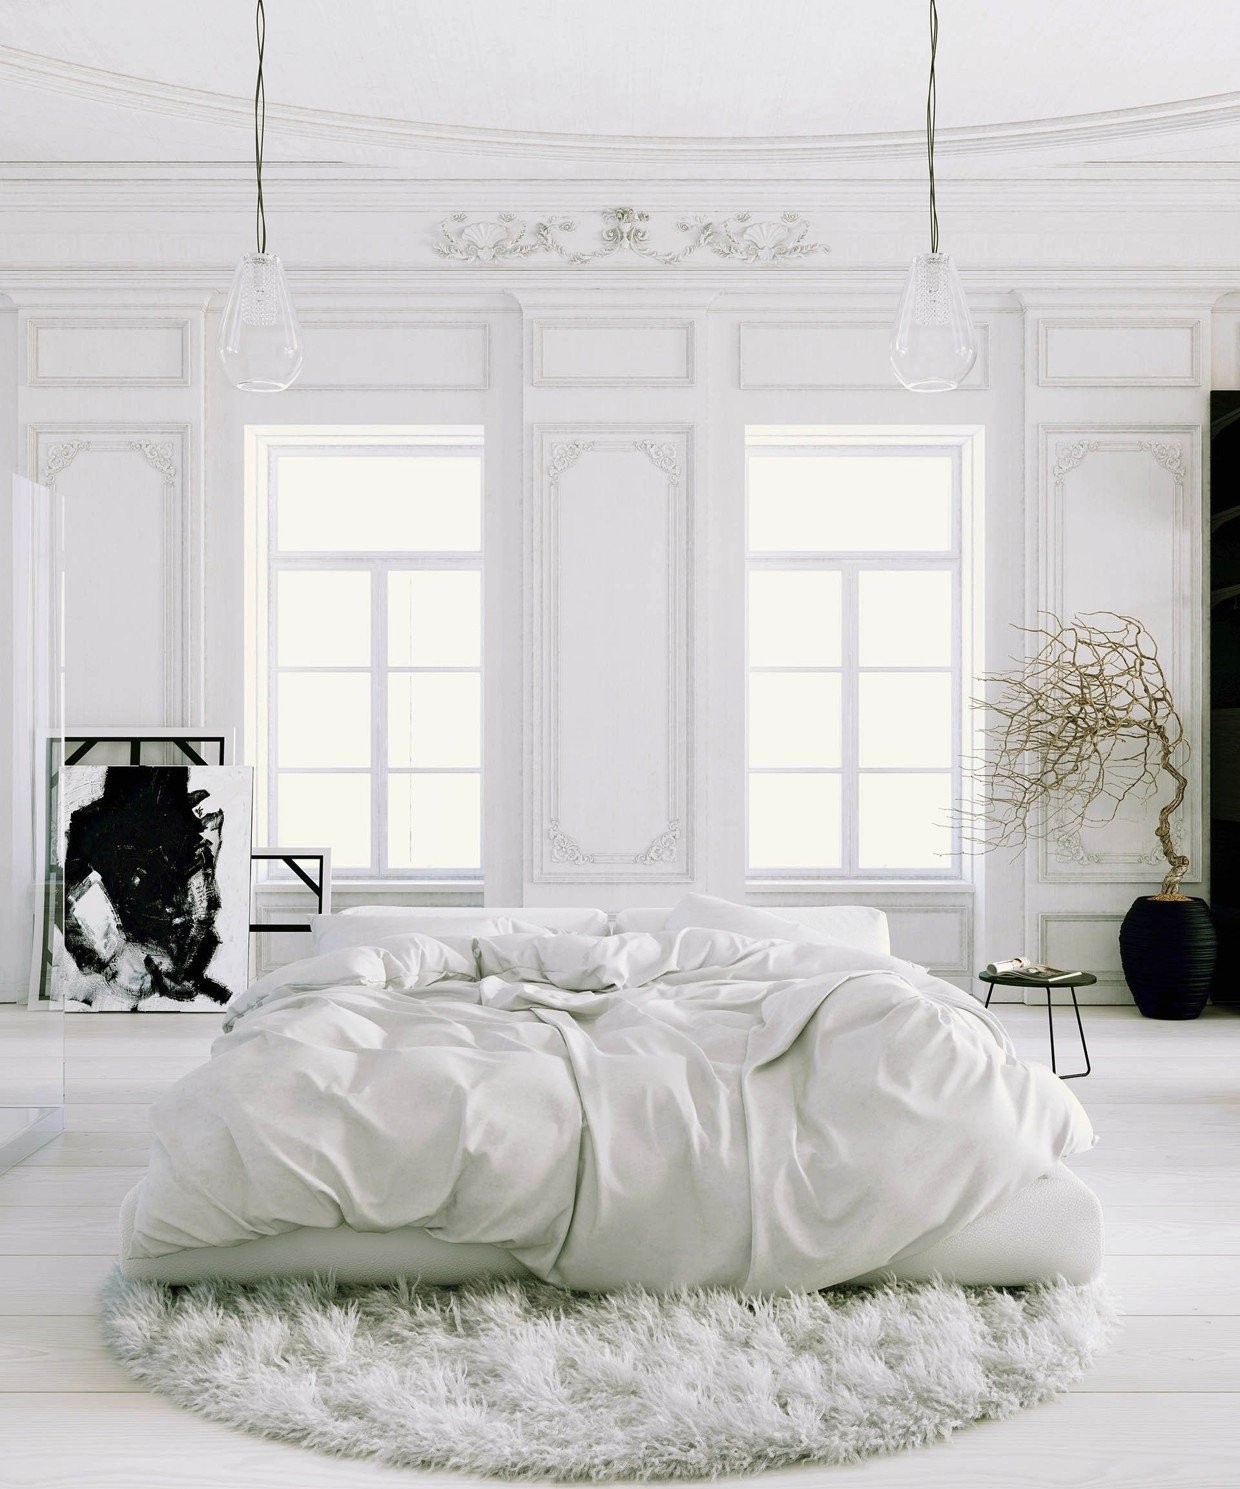 parisian-apartment-soft-white-bedroom-with-black-accents-and-potted-tree1.jpeg